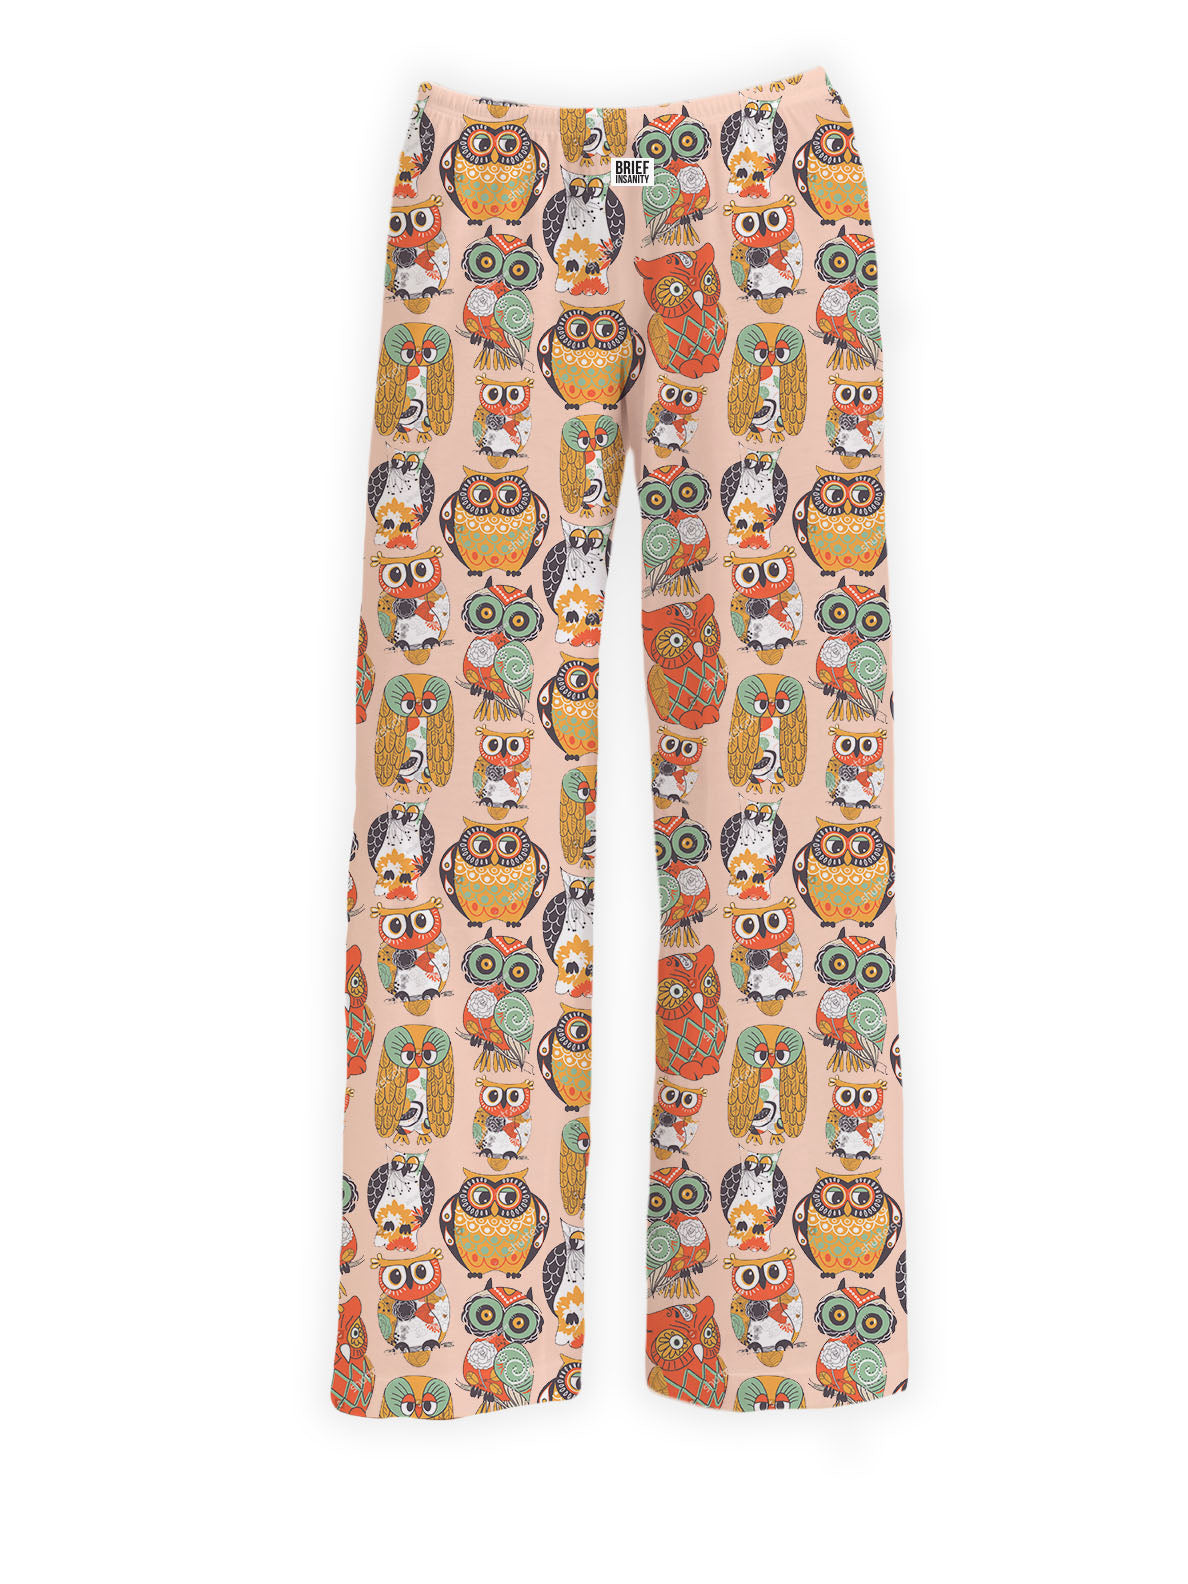 BRIEF INSANITY Owl Lounge Pants